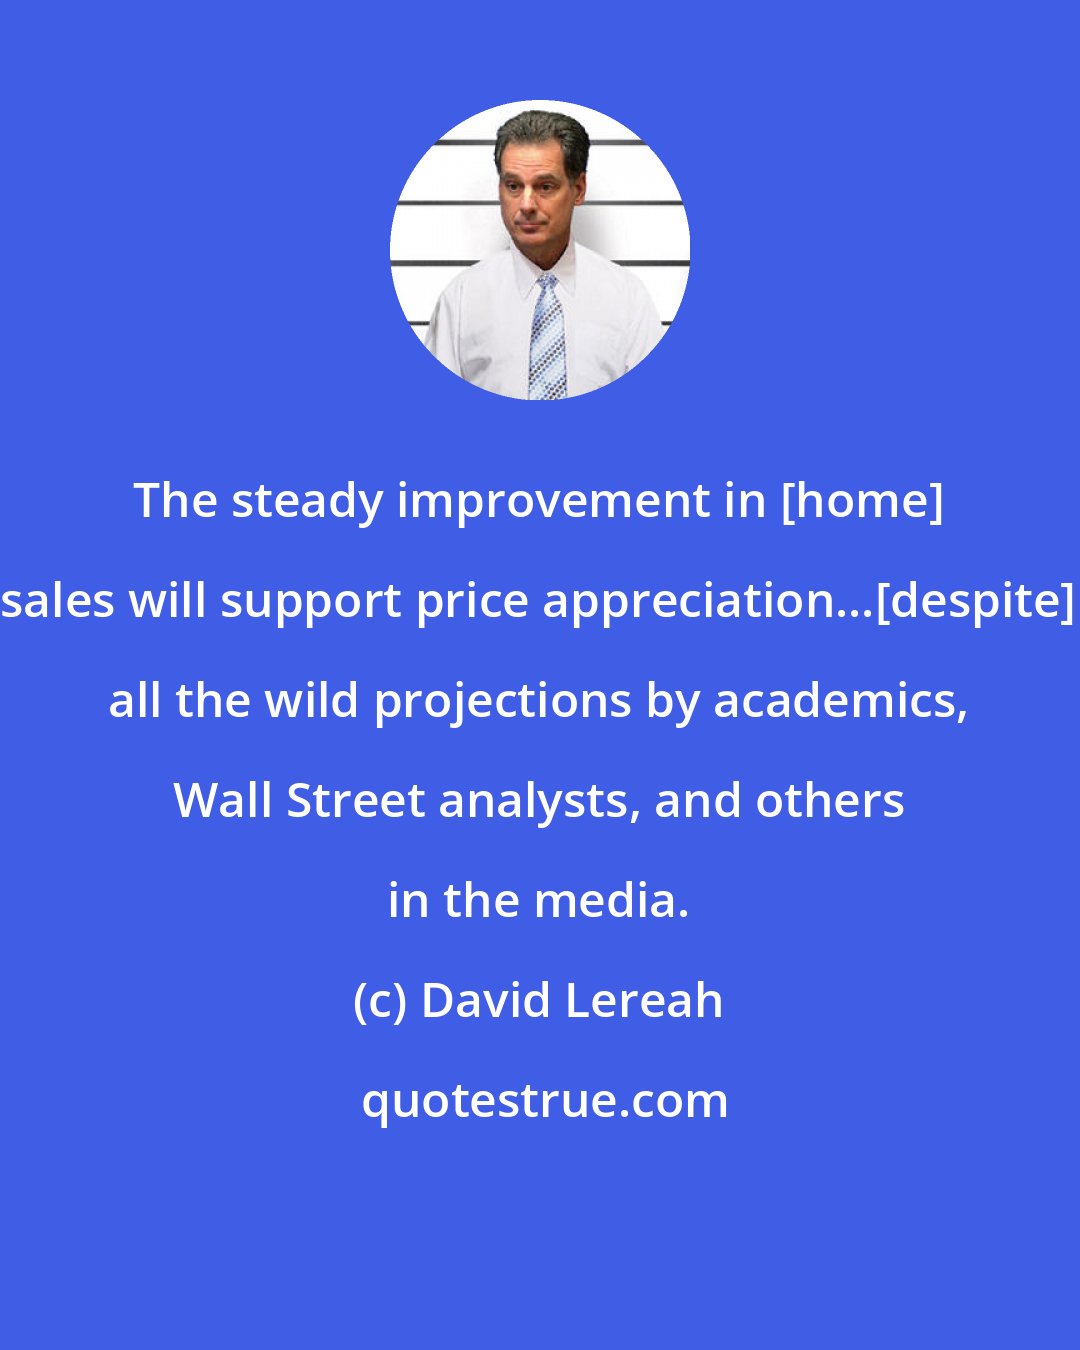 David Lereah: The steady improvement in [home] sales will support price appreciation...[despite] all the wild projections by academics, Wall Street analysts, and others in the media.